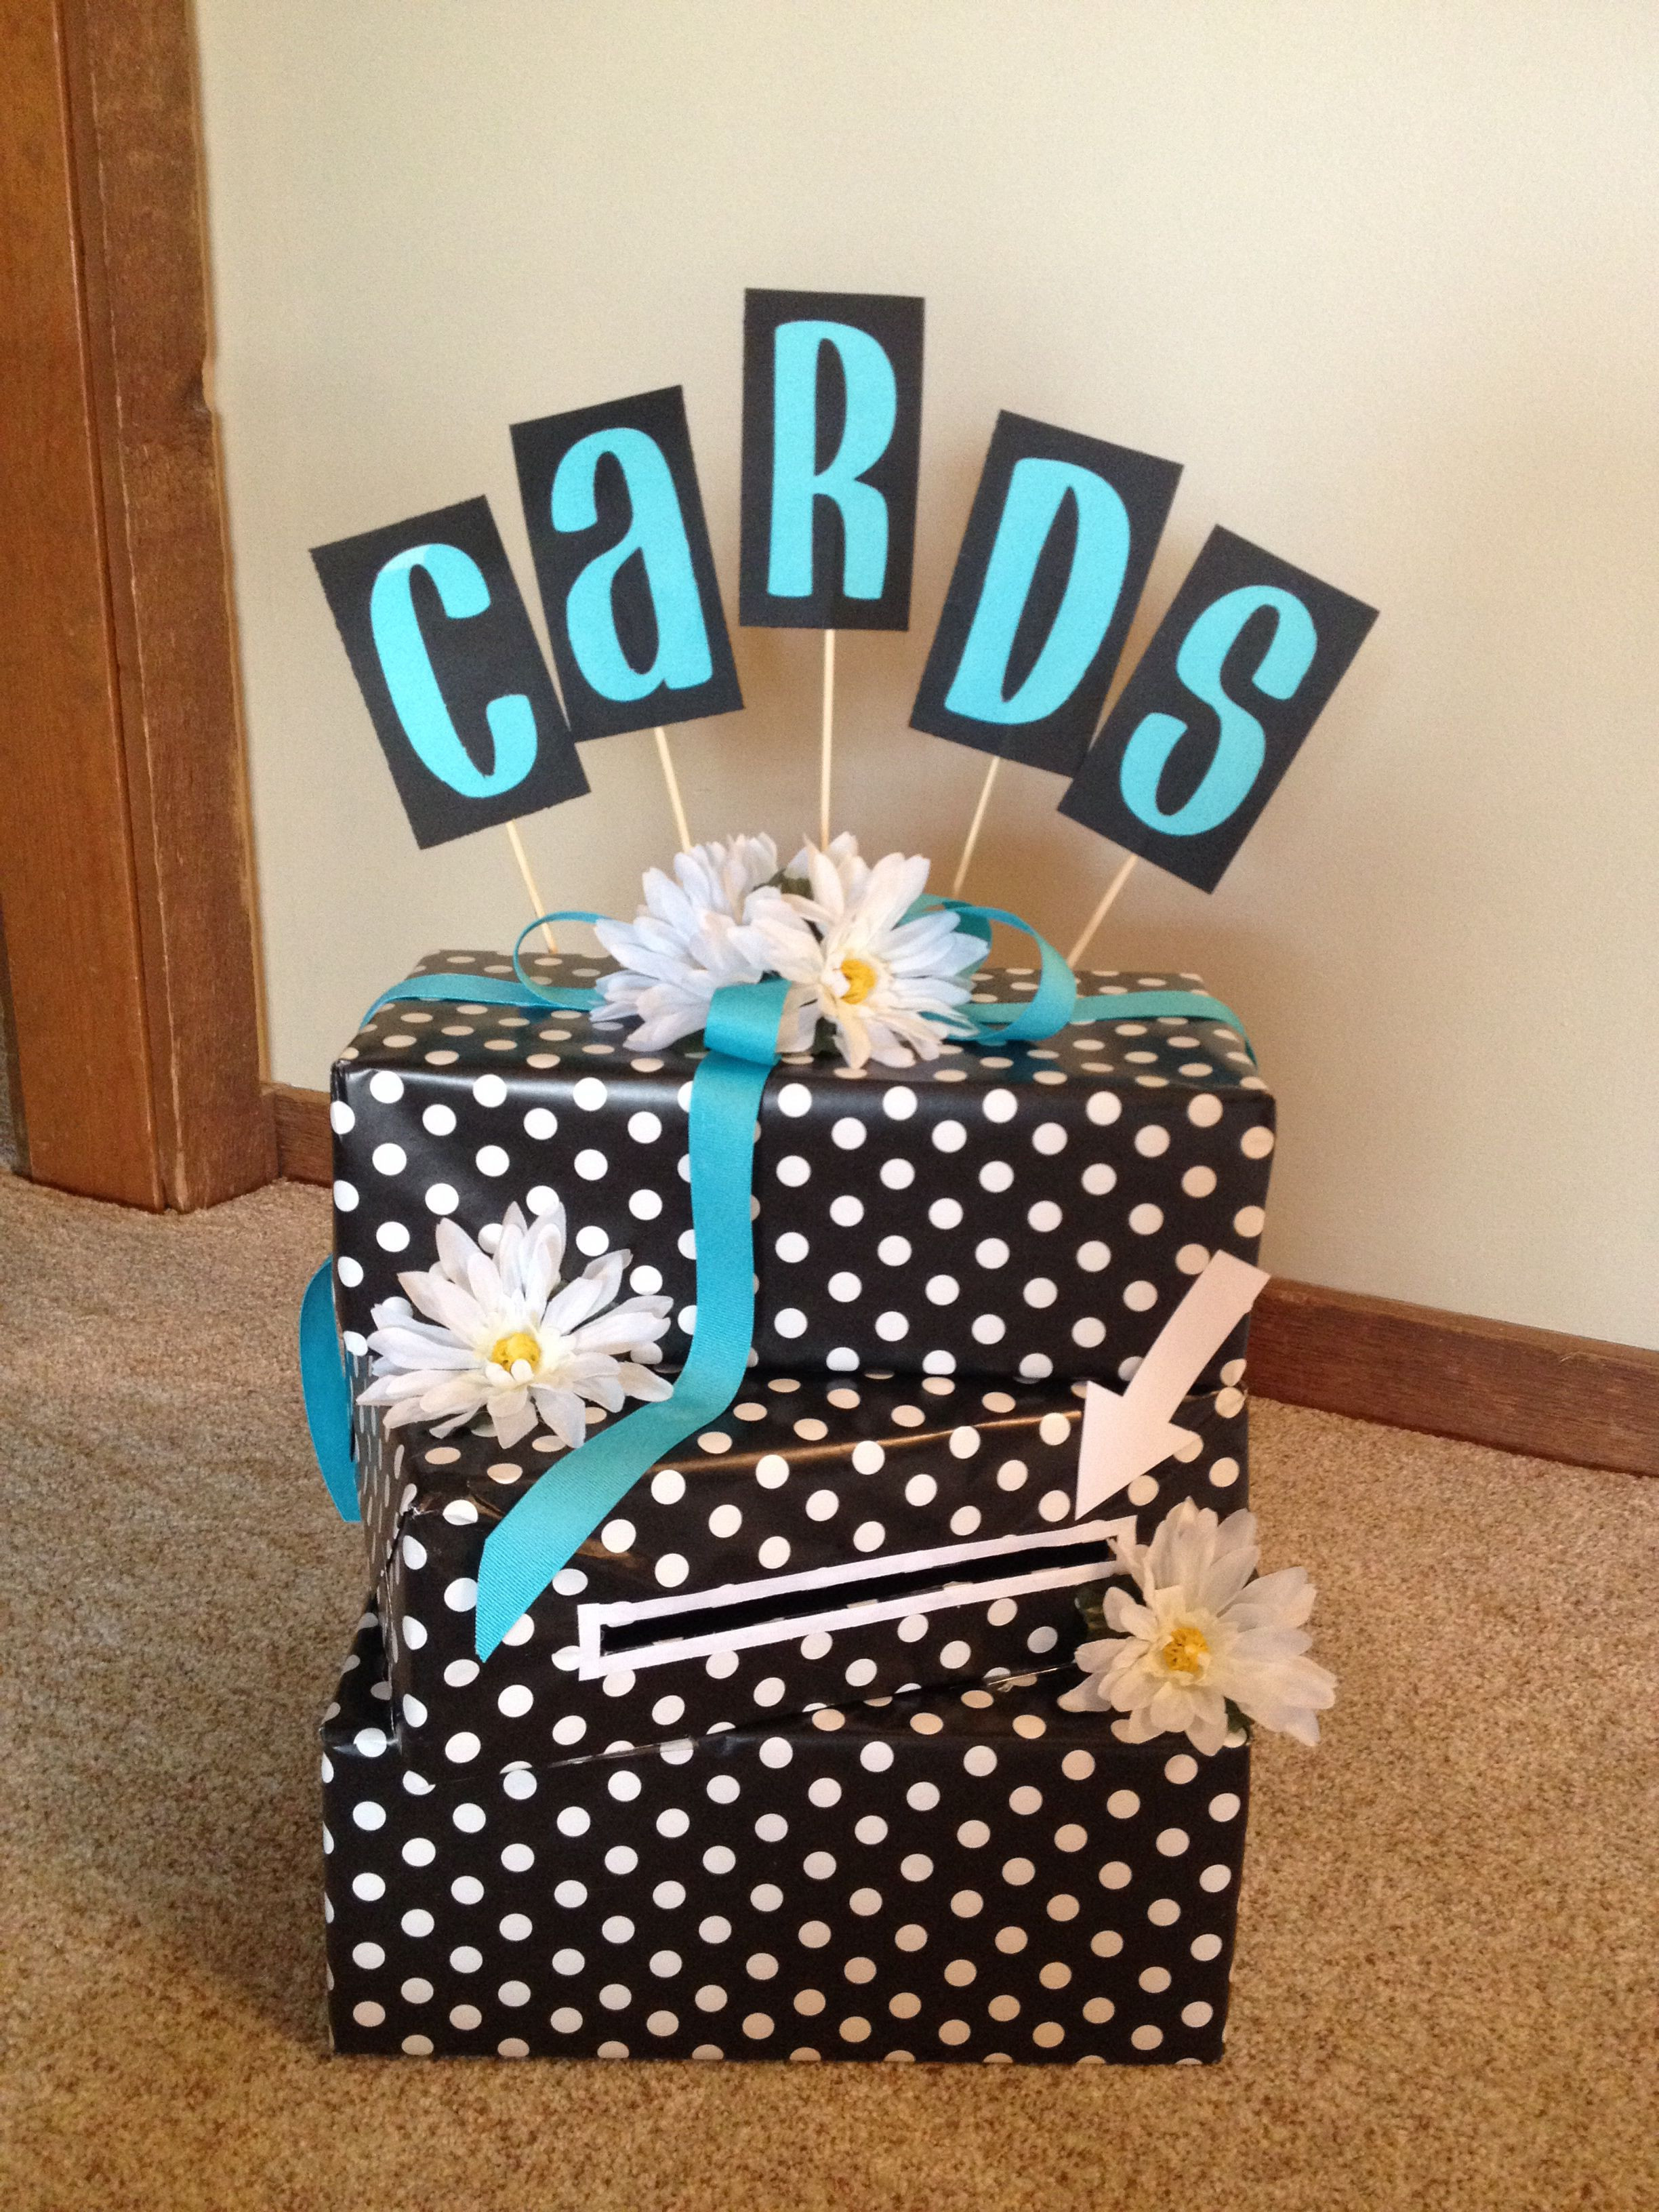 Inexpensive Graduation Party Ideas
 I made this for my daughters graduation open house and she